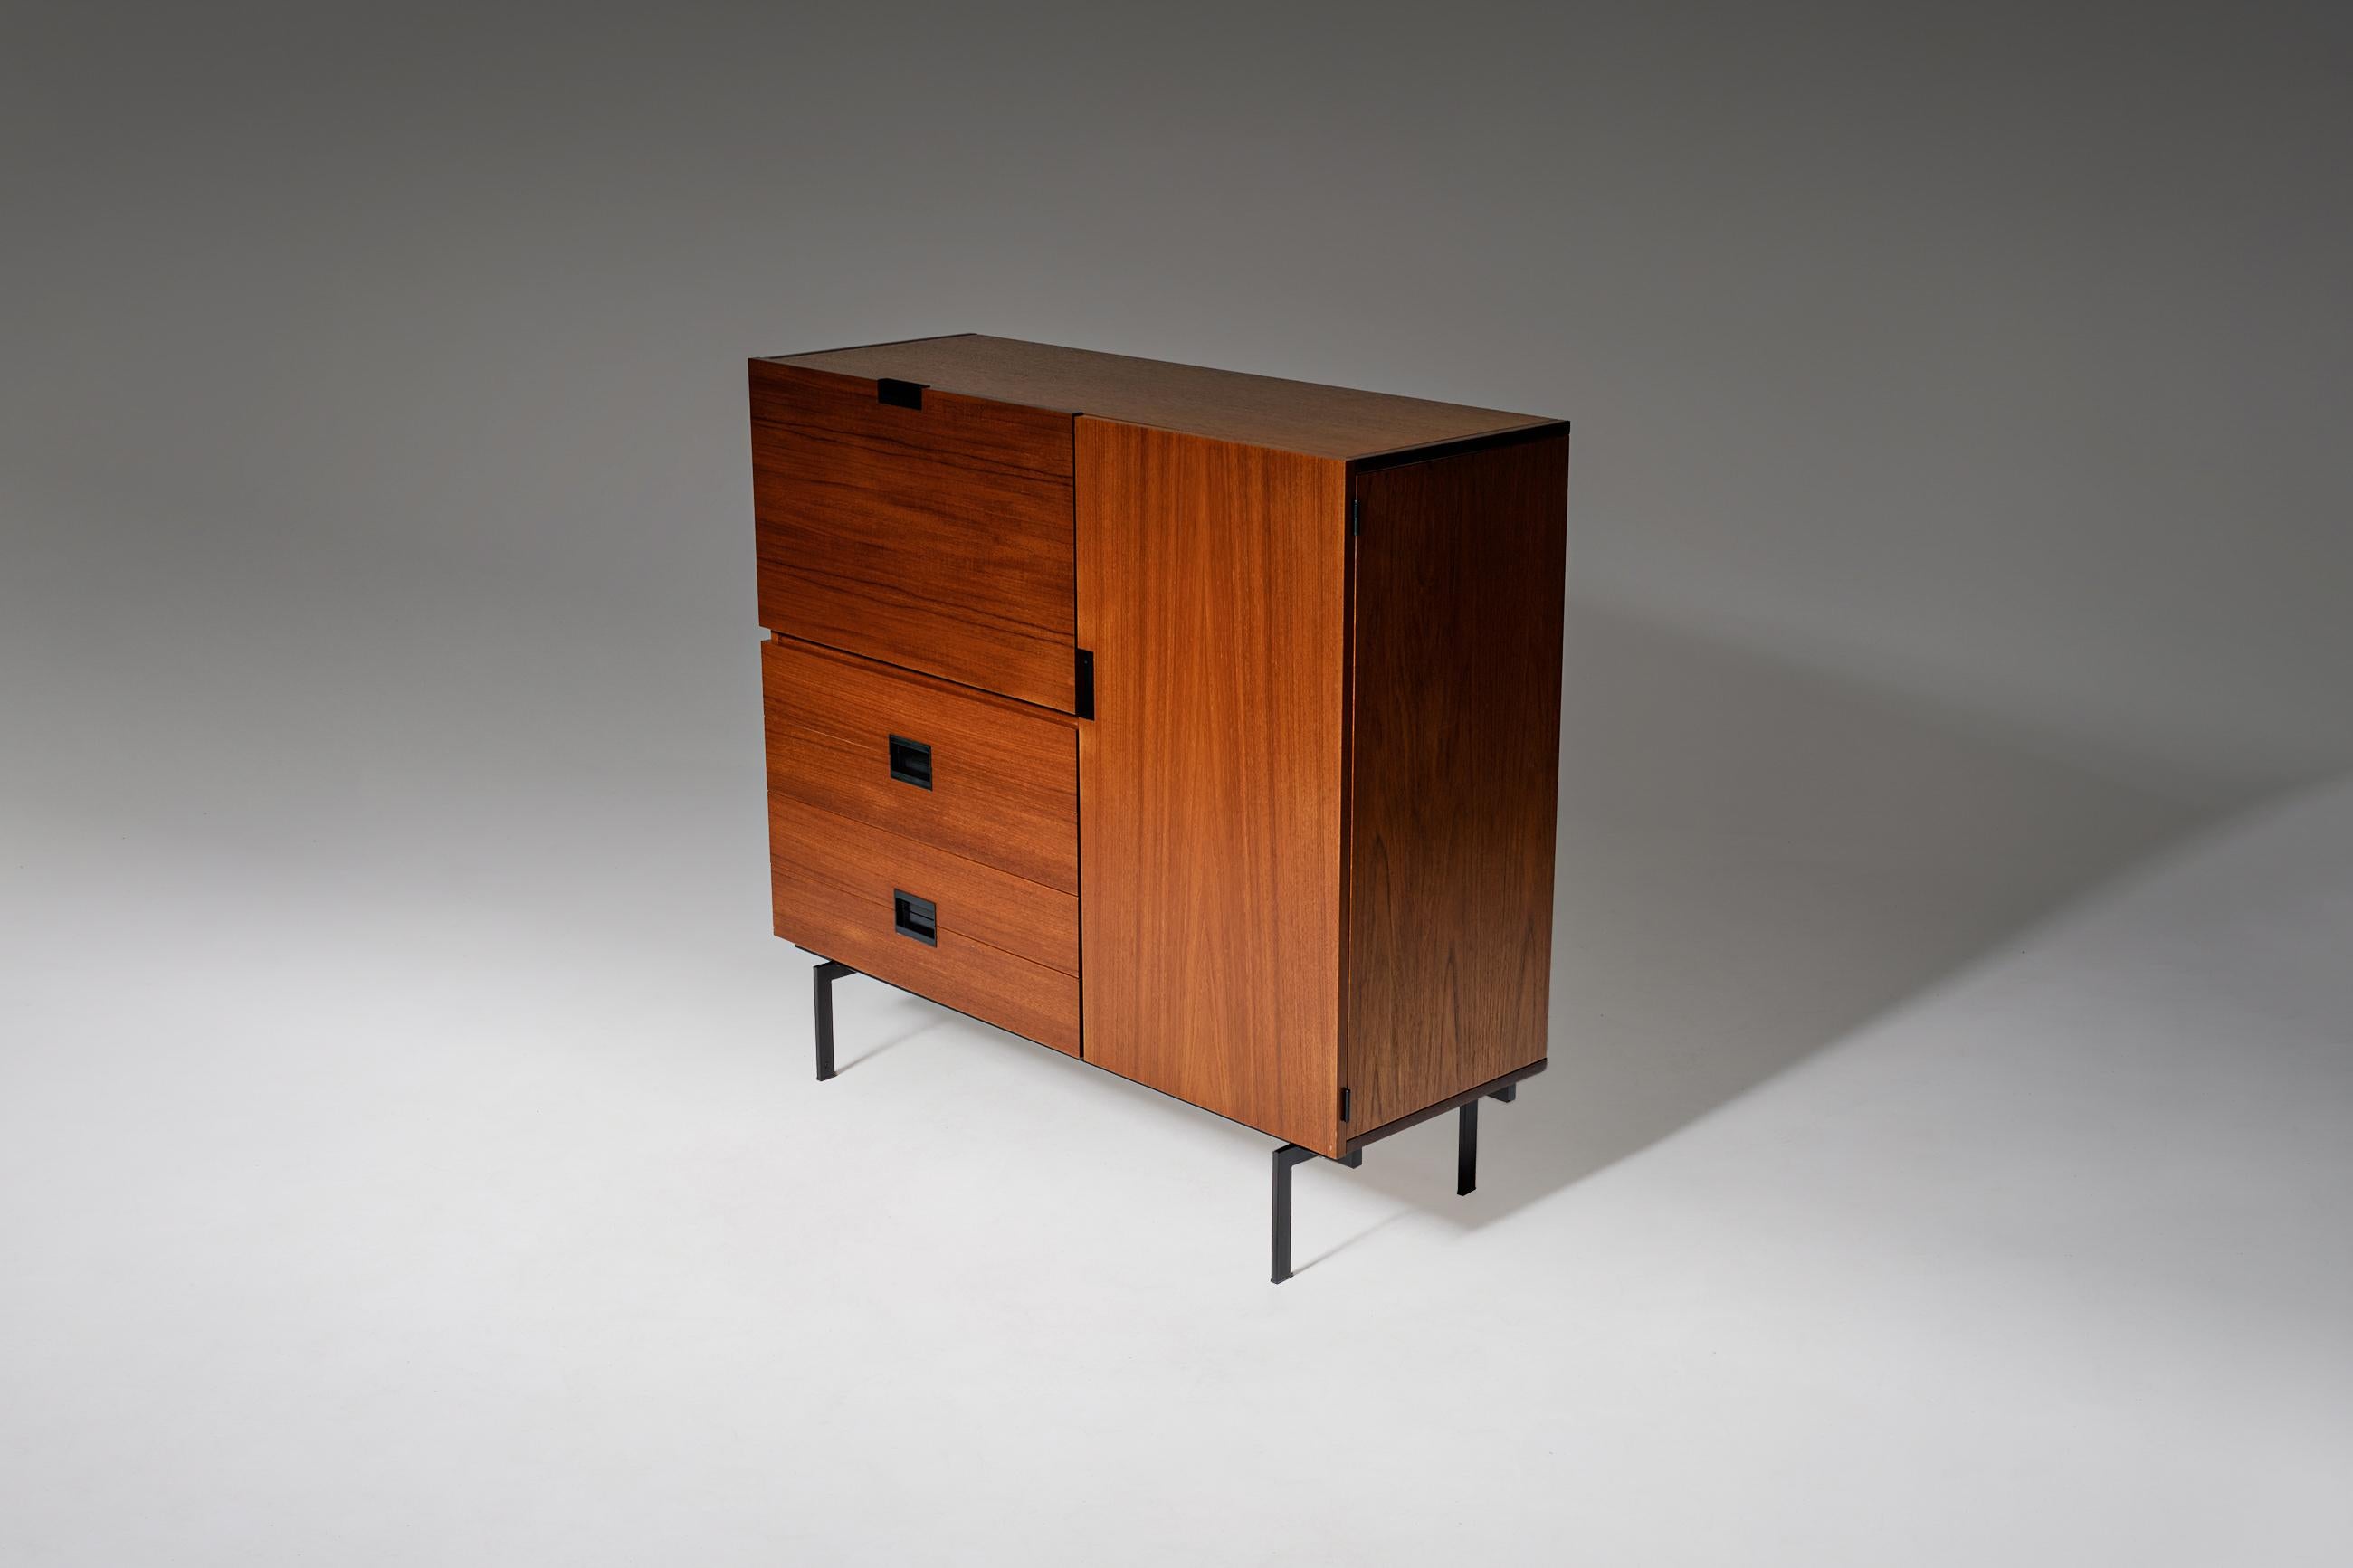 Mid-Century Modern high board or bar cabinet by Cees Braakman for UMS Pastoe, The Netherlands 1958. The cabinet is part of the famous Japanese series. Constructed out of teak with a deep and warm color. The cabinet stands on a minimalistic black